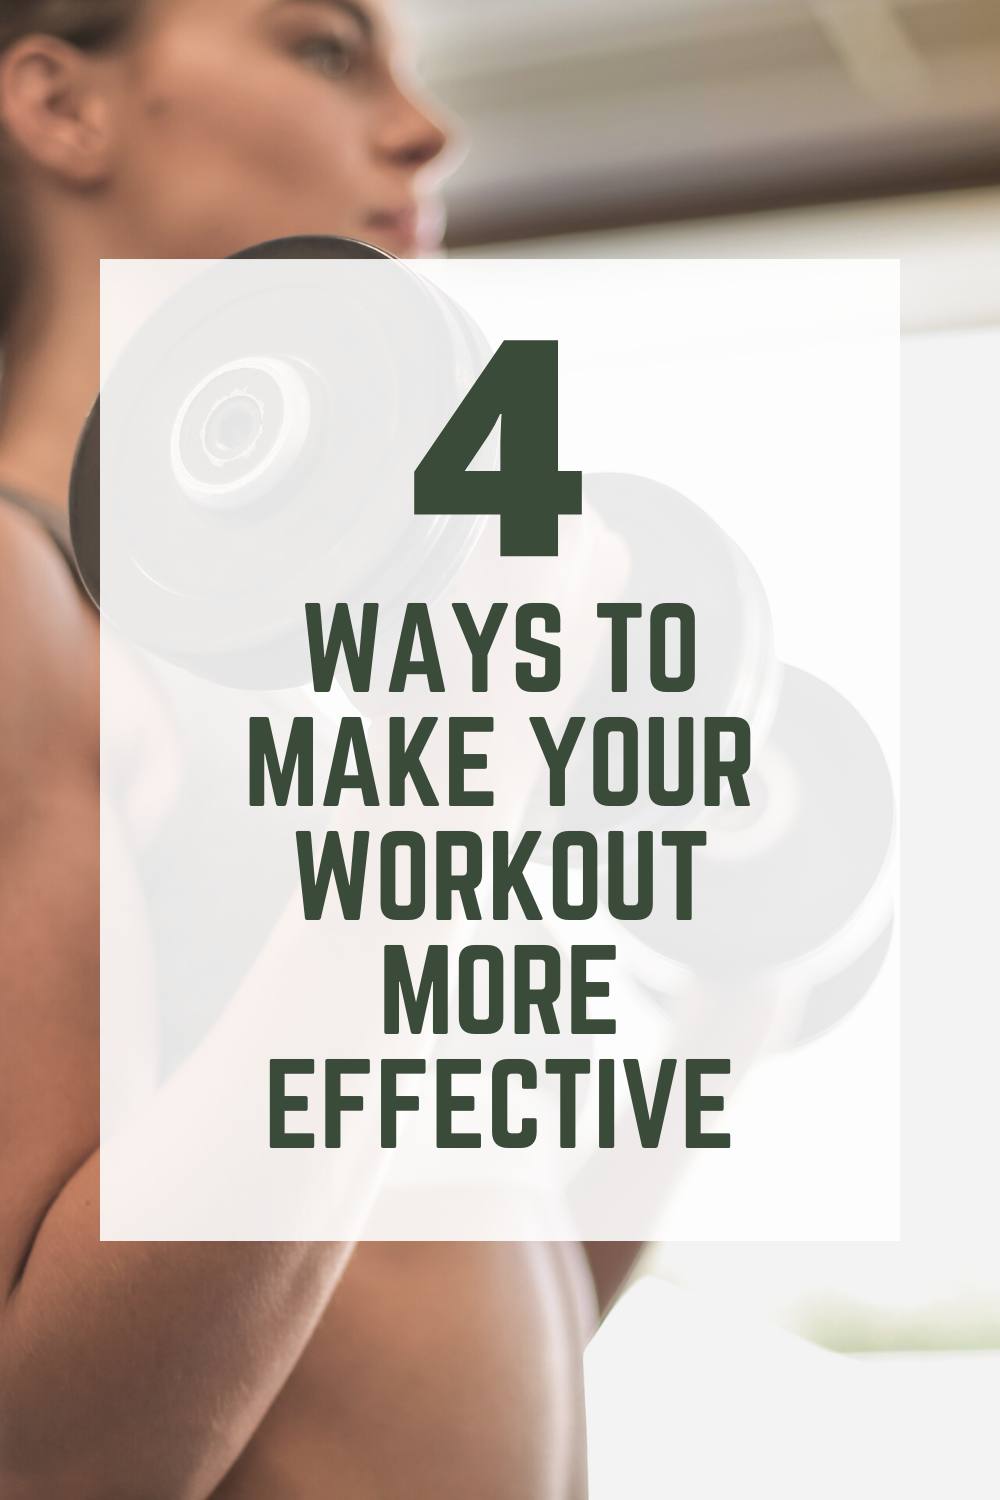 Ways to Make Your Workout More Effective